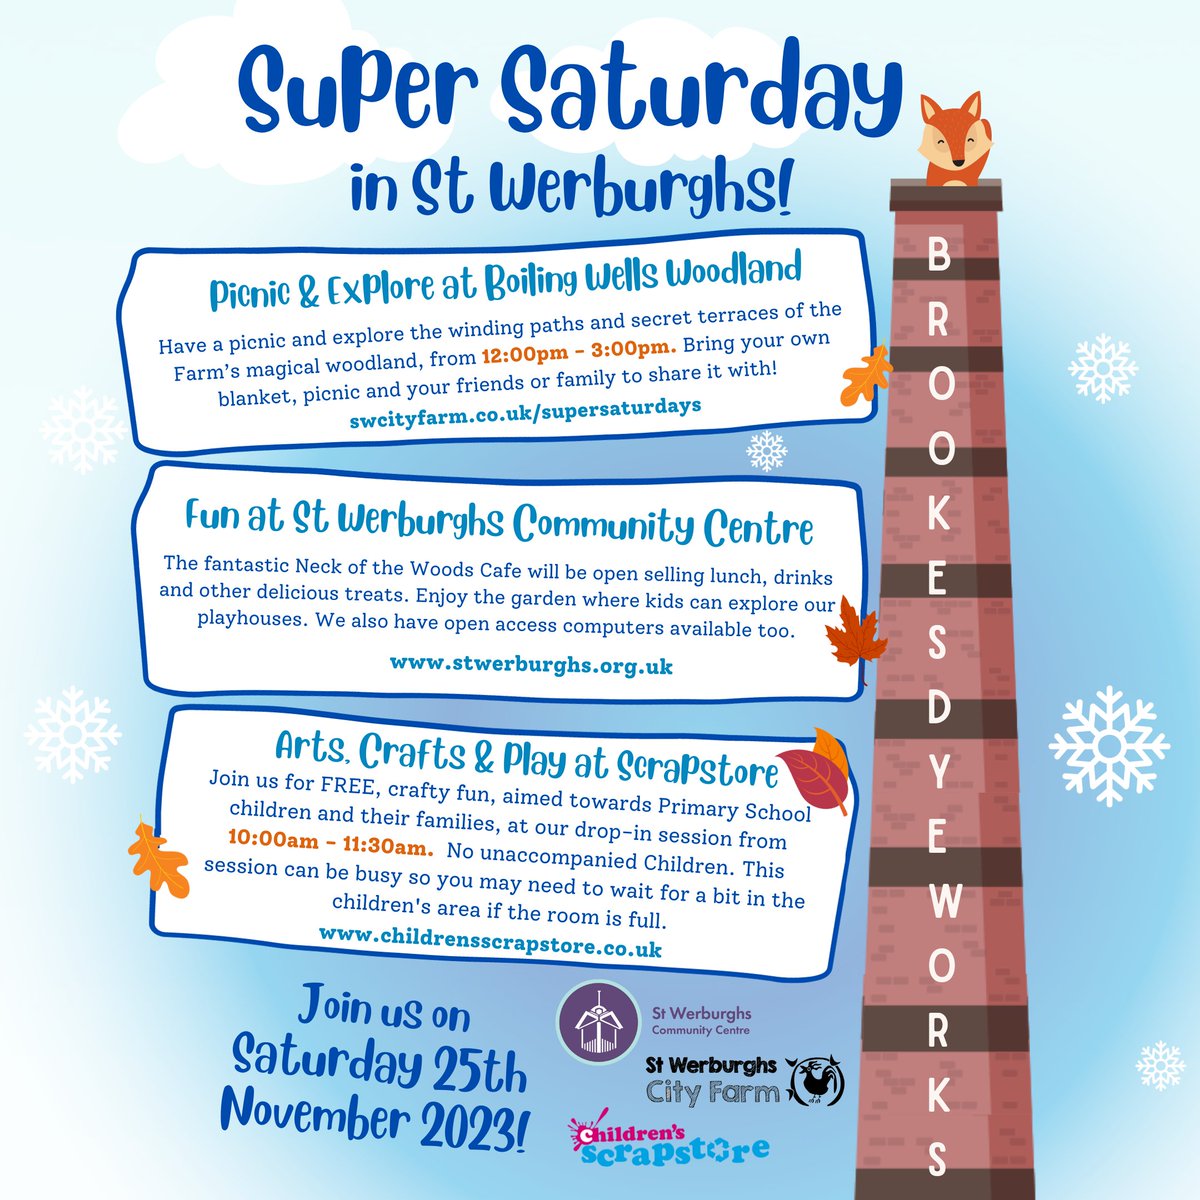 Come along for some cosy crafting and join us for our last #supersaturday of the year!

November 25th will be filled with free, festive fun at #childrensscrapstore, @swcityfarm, and @StWerbsCC. See you there!

#bristolkids #bristolplayandyouth